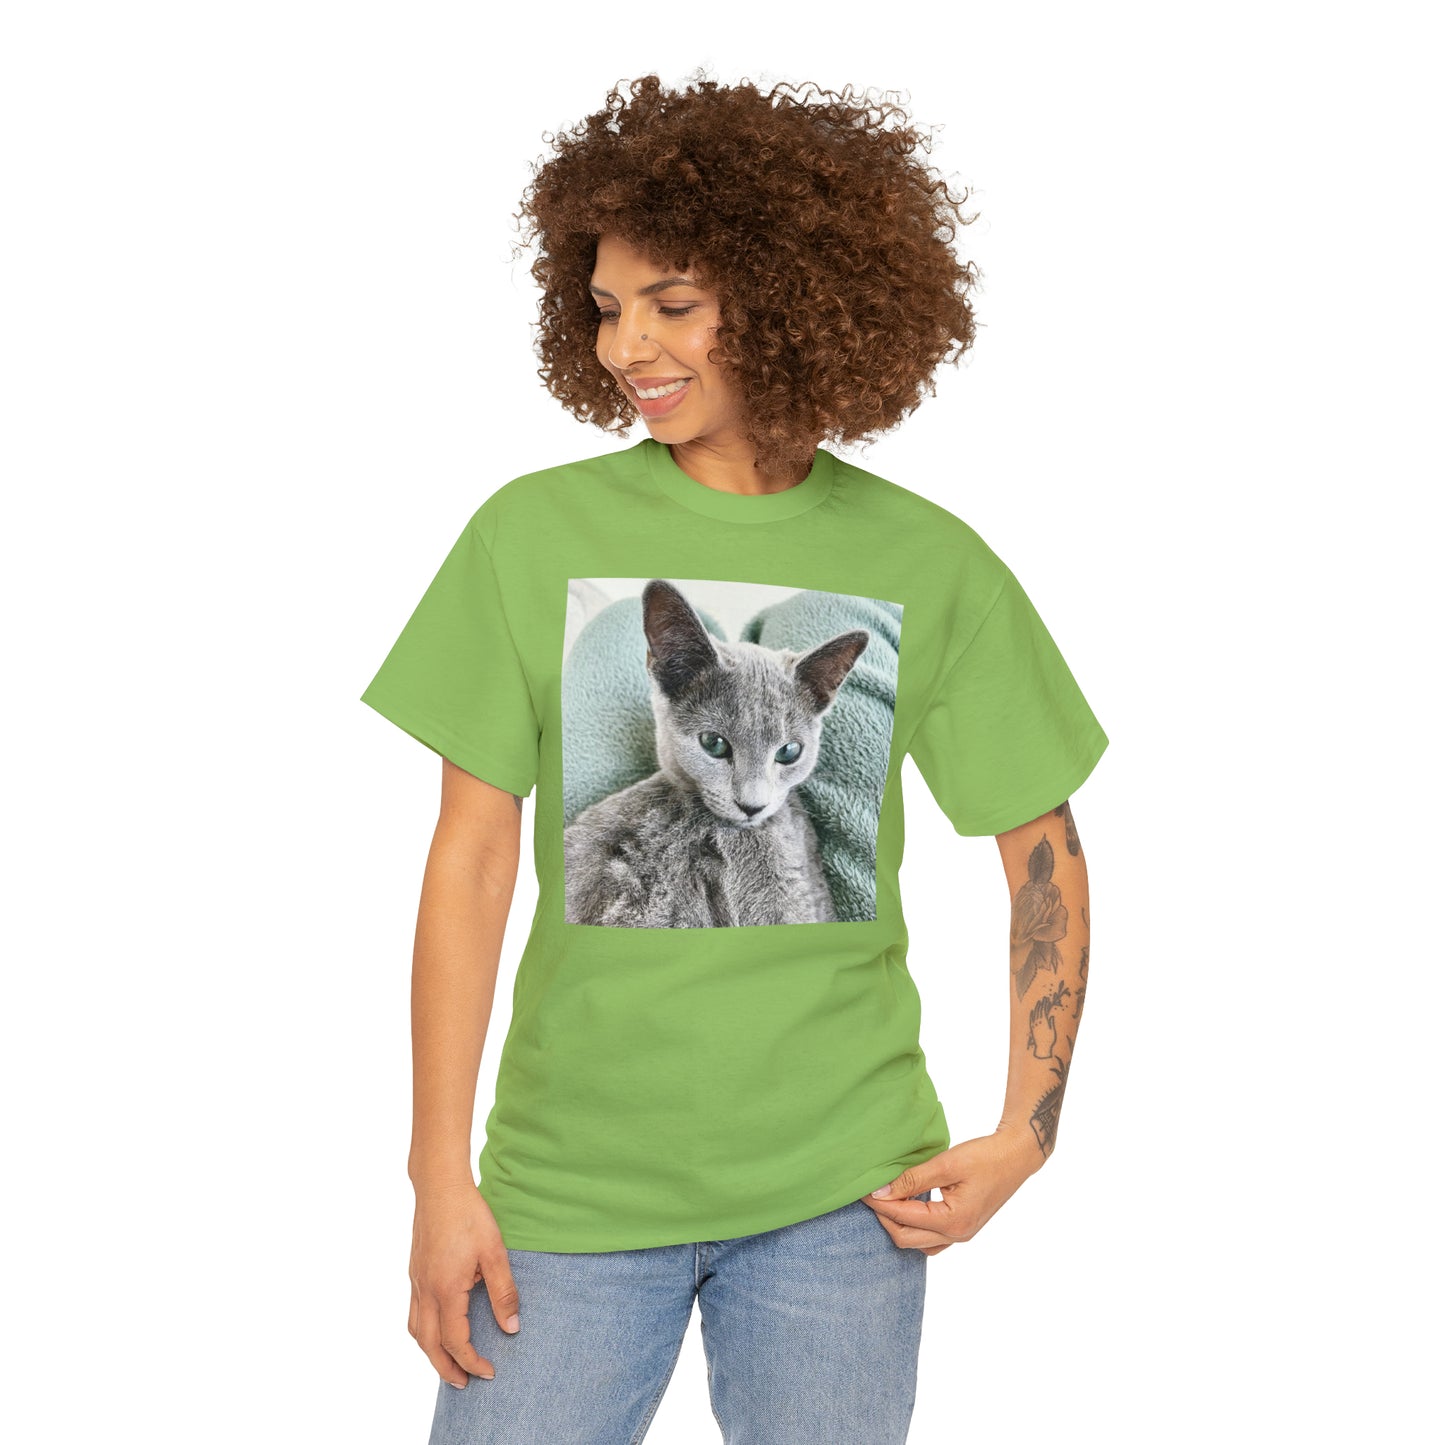 Mint Siamese - Hurts Shirts Collection